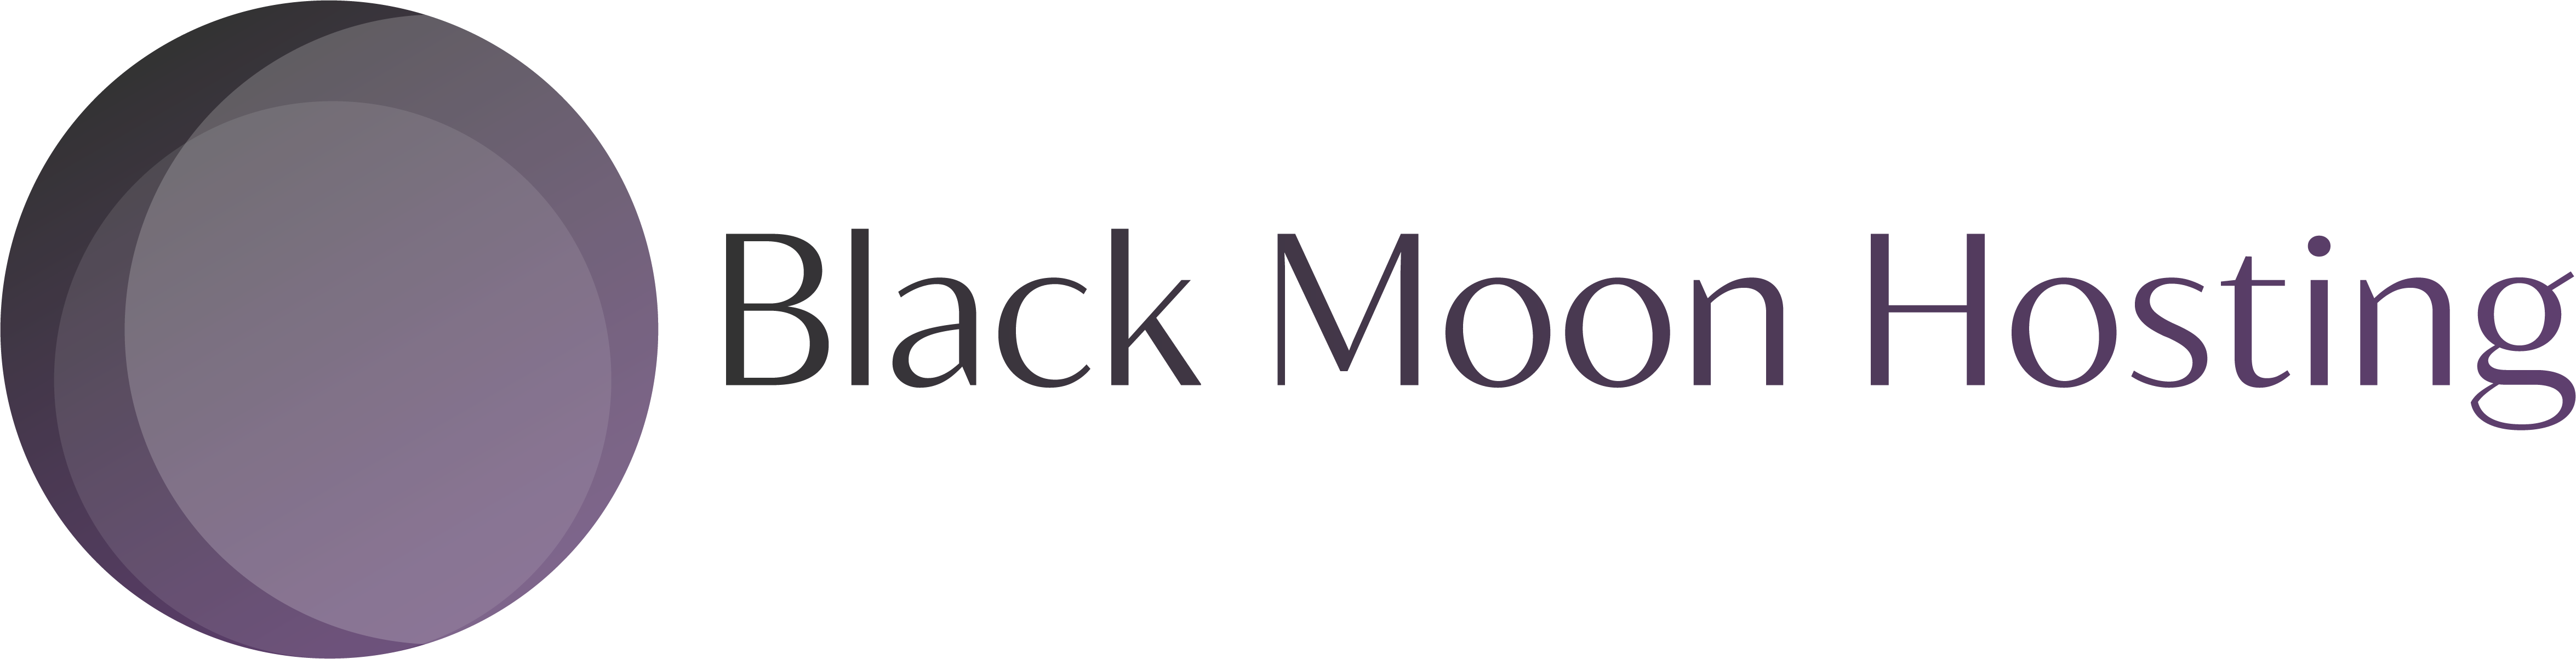 Black Moon Hosting Coupons and Promo Code